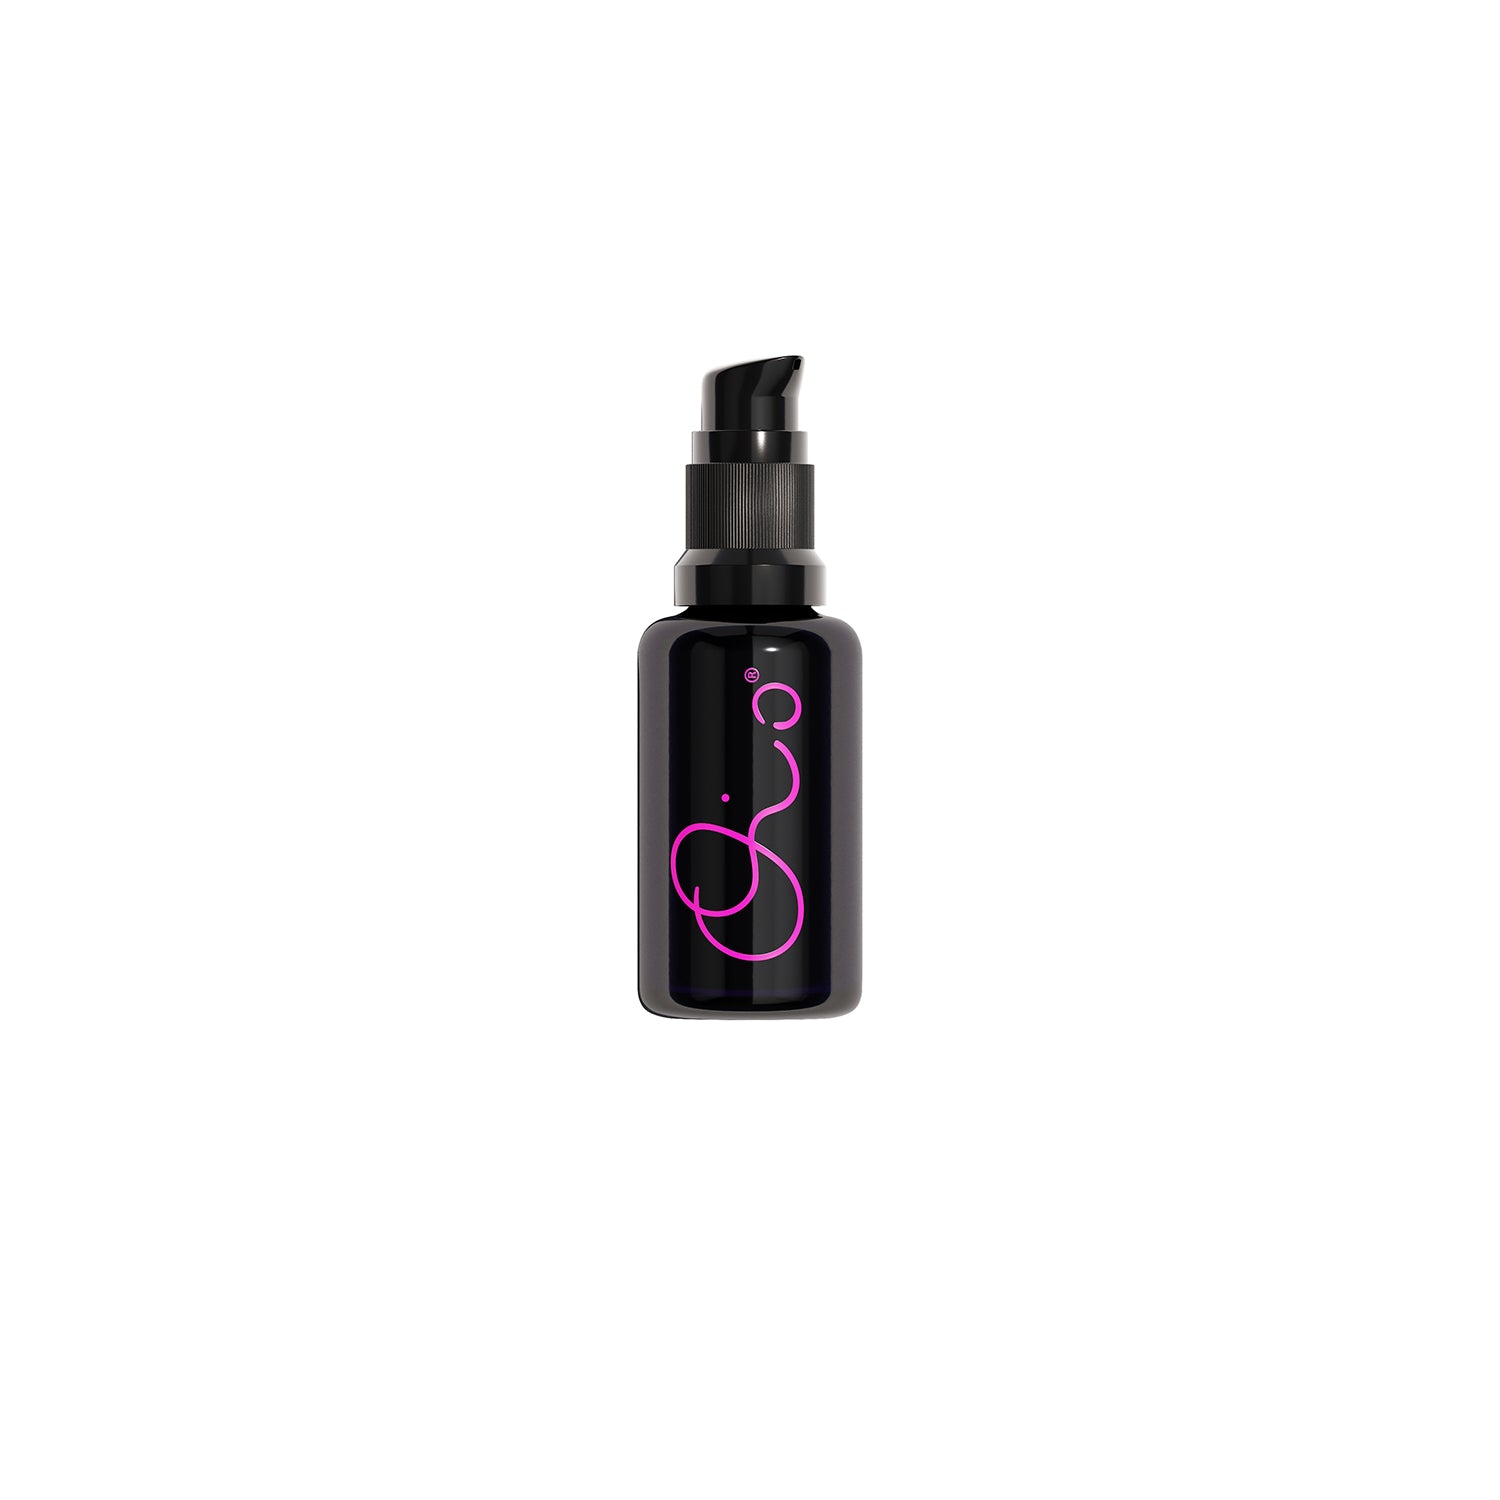 OIO LAB Gel-Lotion Fusion Supercharged Glow Facial Serum